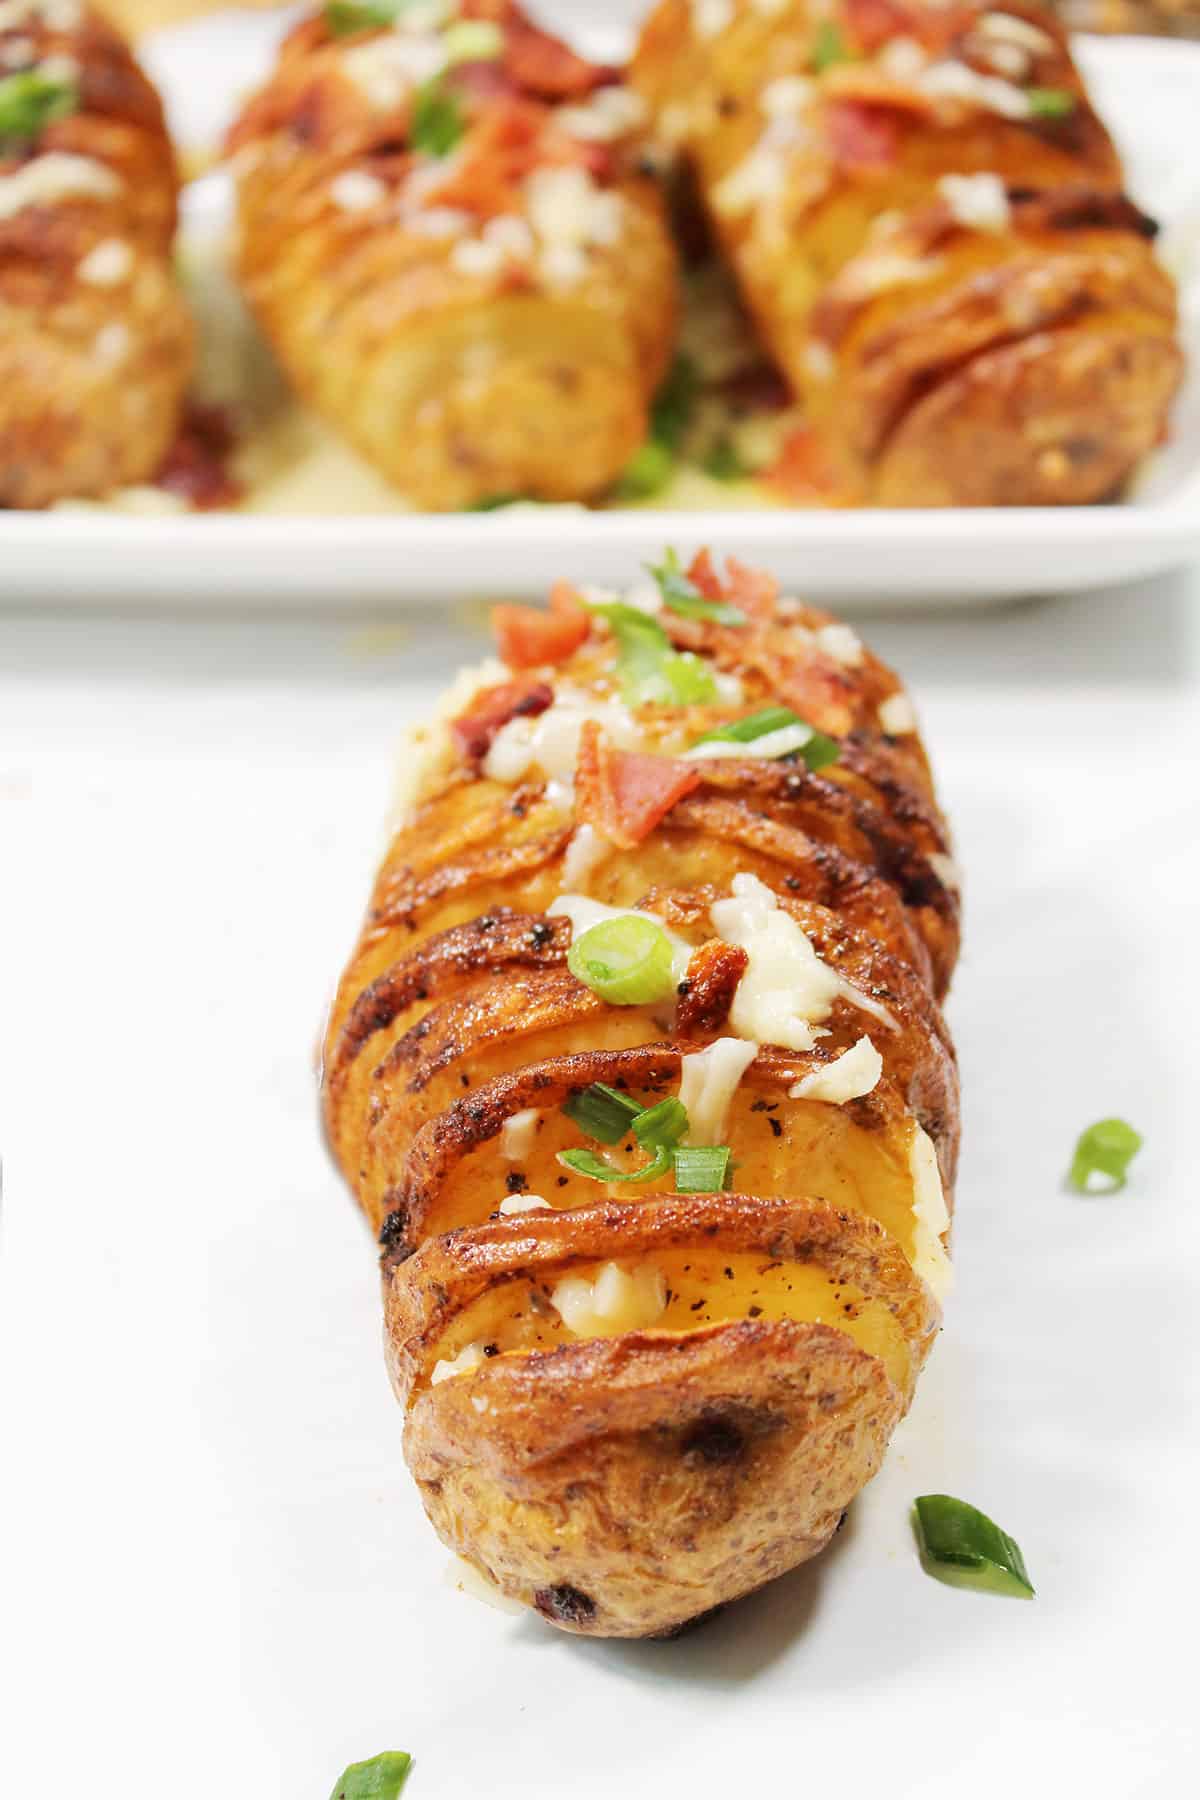 Dressed air fried hasselback potato in front of platter.